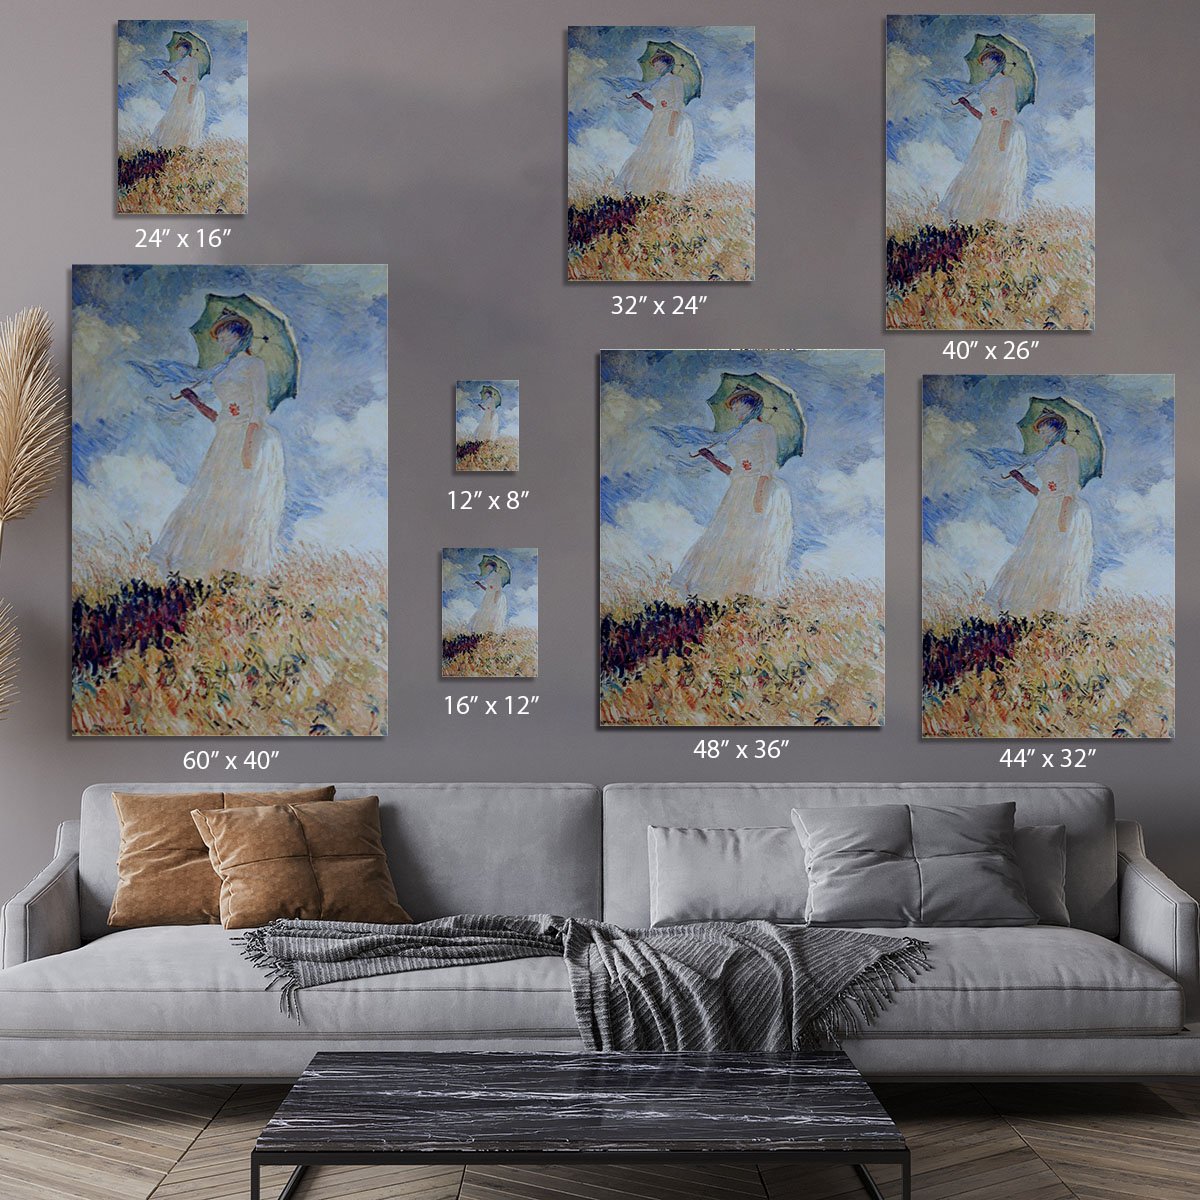 Lady with umbrella Canvas Print or Poster